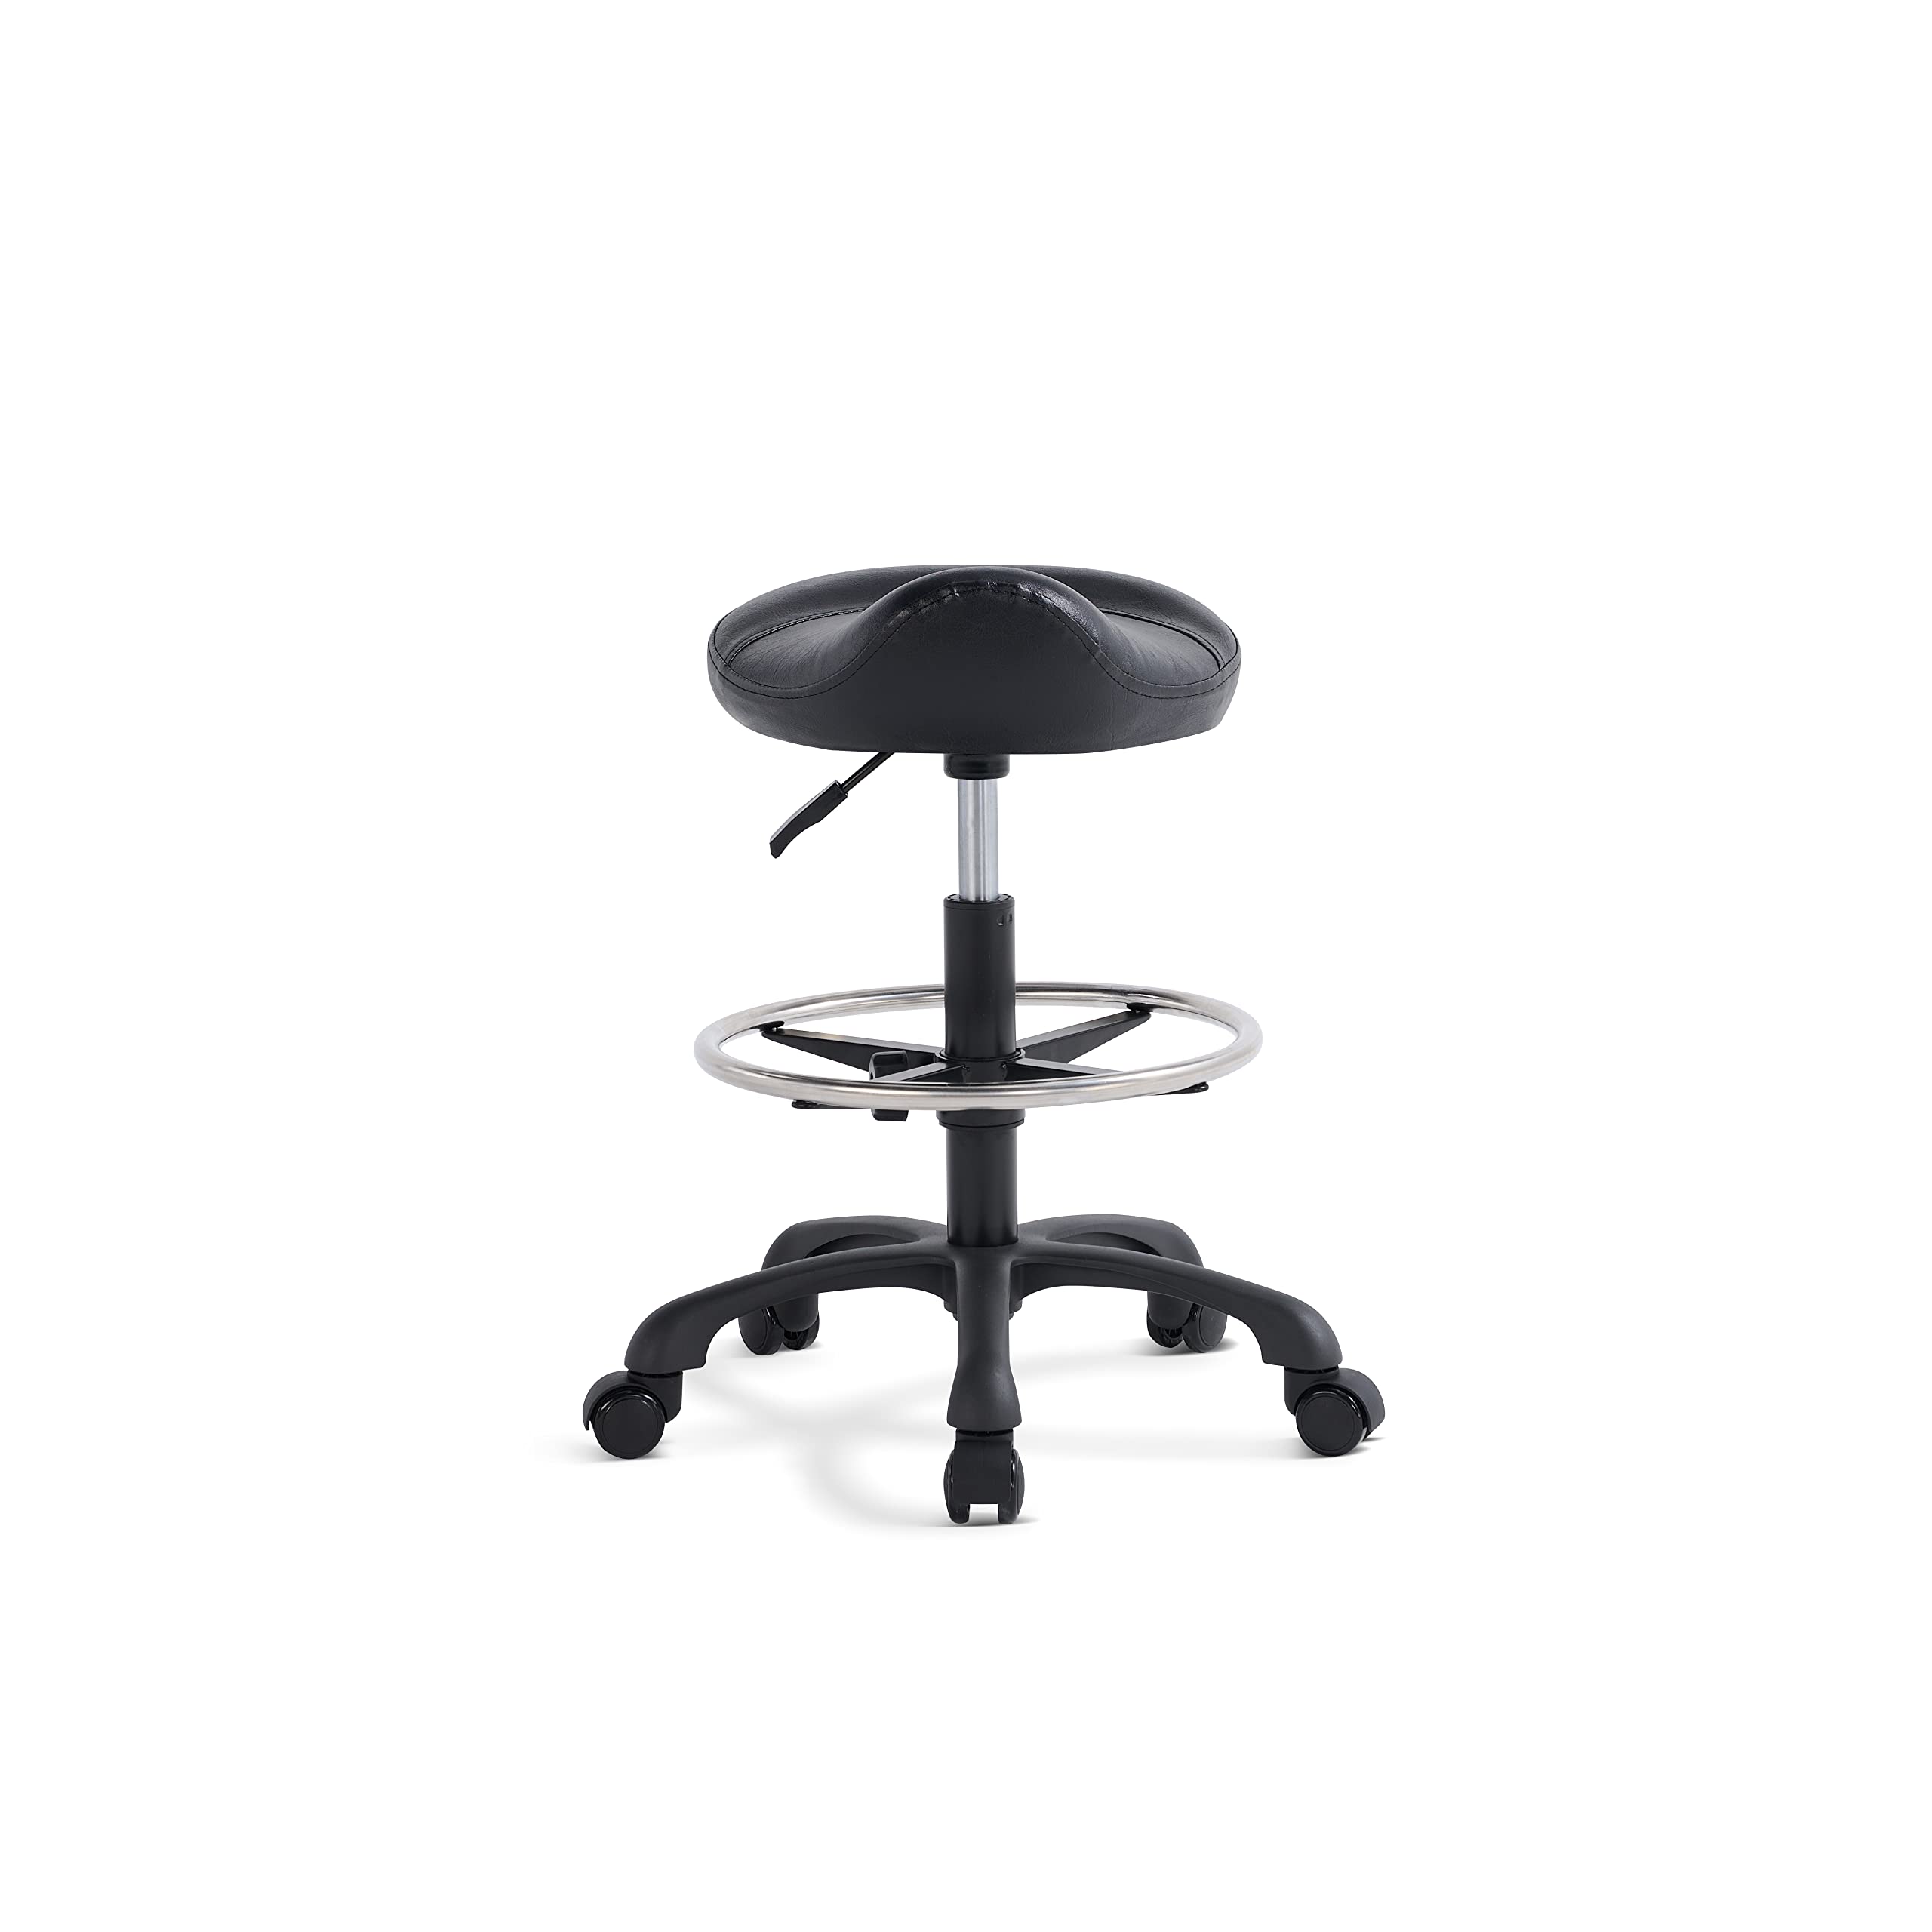 Saddle Makeup Rolling Chair for Medical Massage Salon KitchenAdjustable Hydraulic Stool with Wheels with Black LiftBlack w